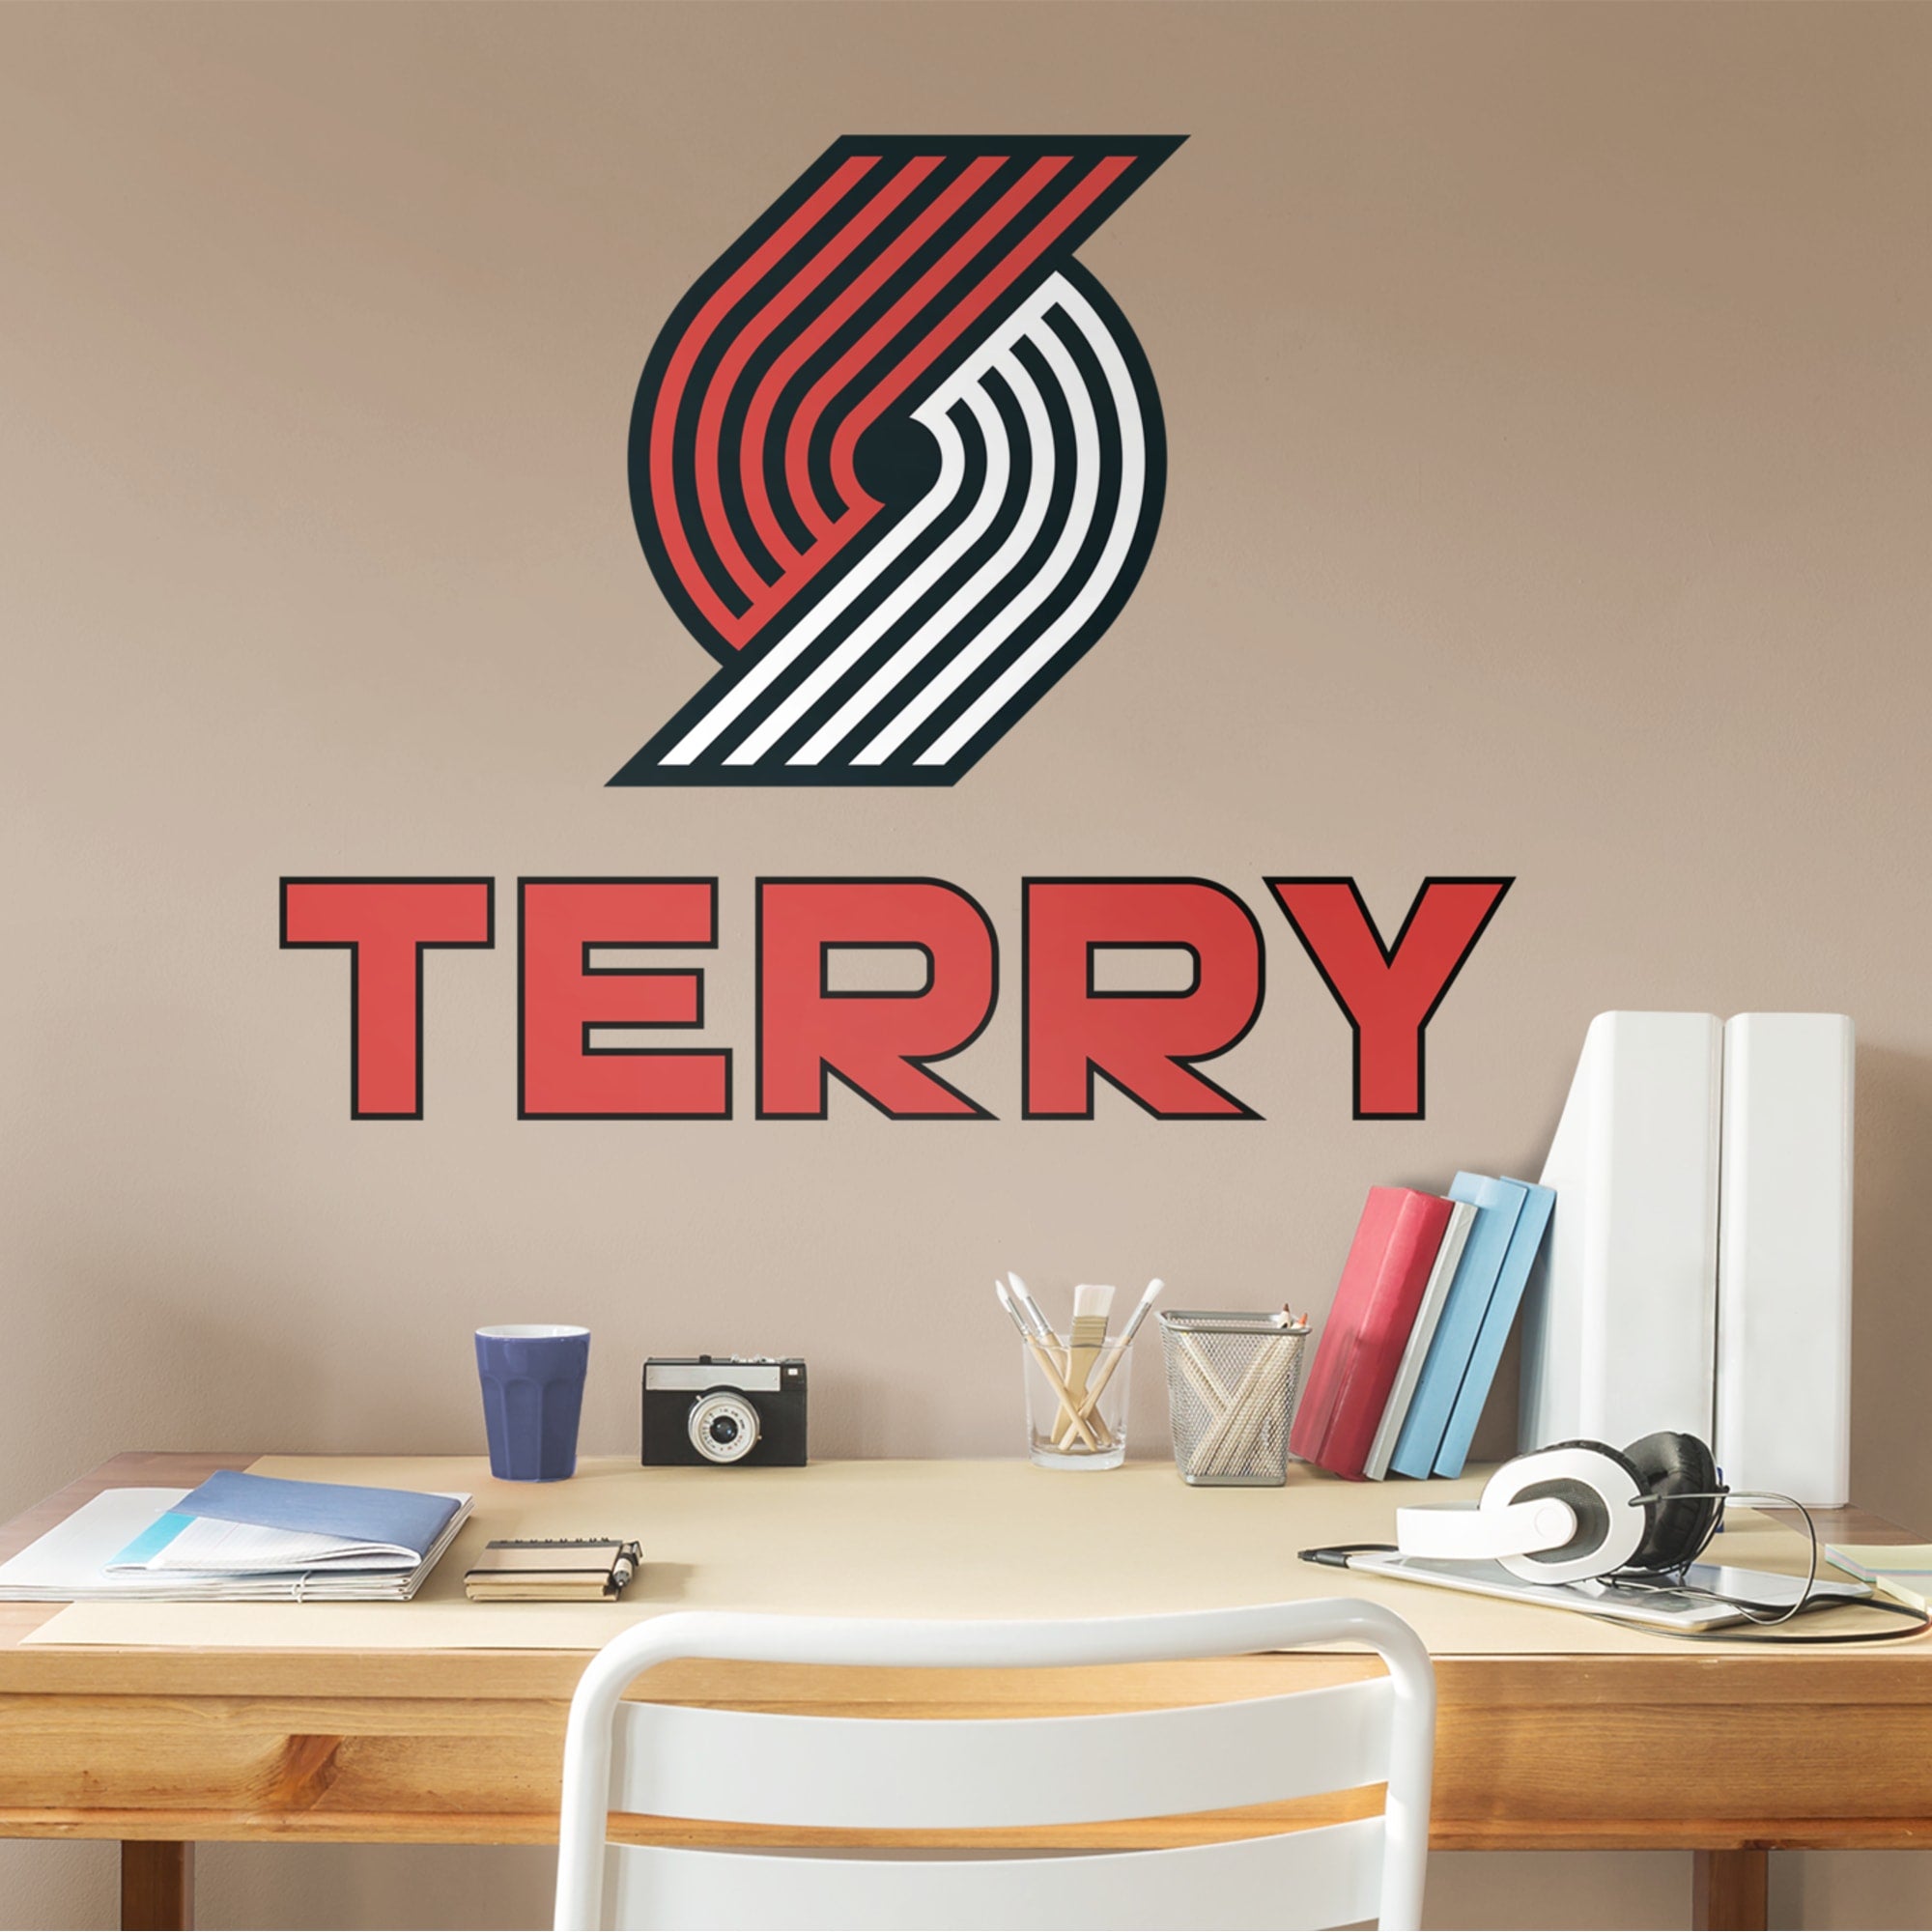 Portland Trail Blazers: Stacked Personalized Name - Officially Licensed NBA Transfer Decal in Red (39.5"W x 52"H) by Fathead | V